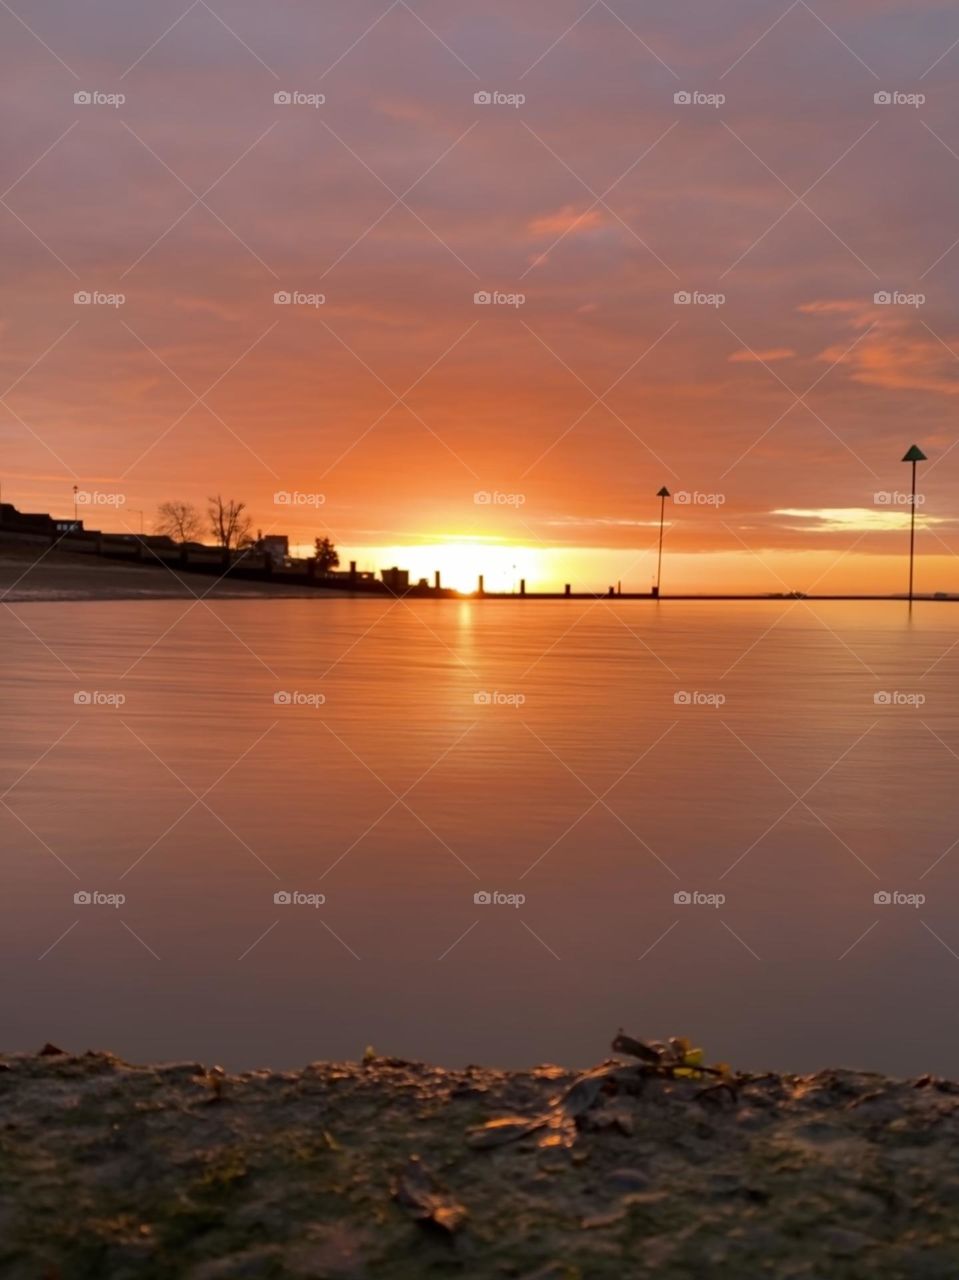 A warm beach sunrise scene with reflections on the water 